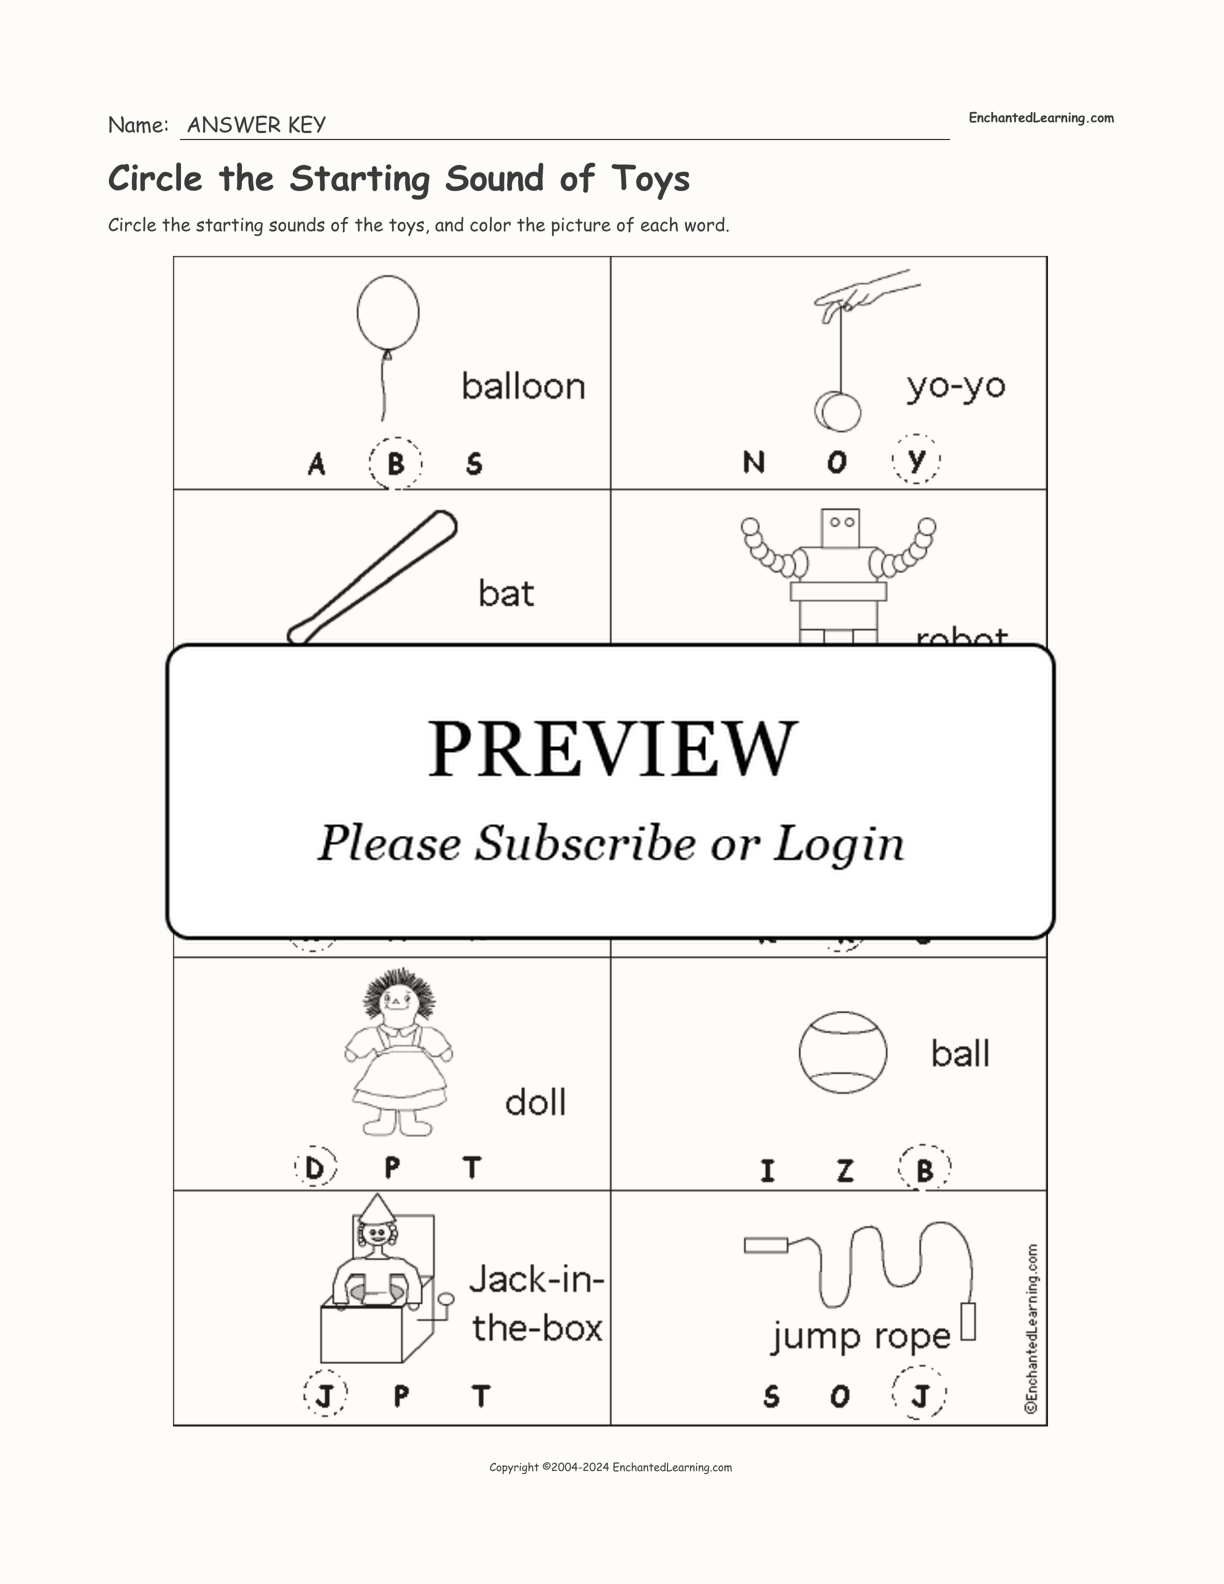 Circle the Starting Sound of Toys interactive worksheet page 2